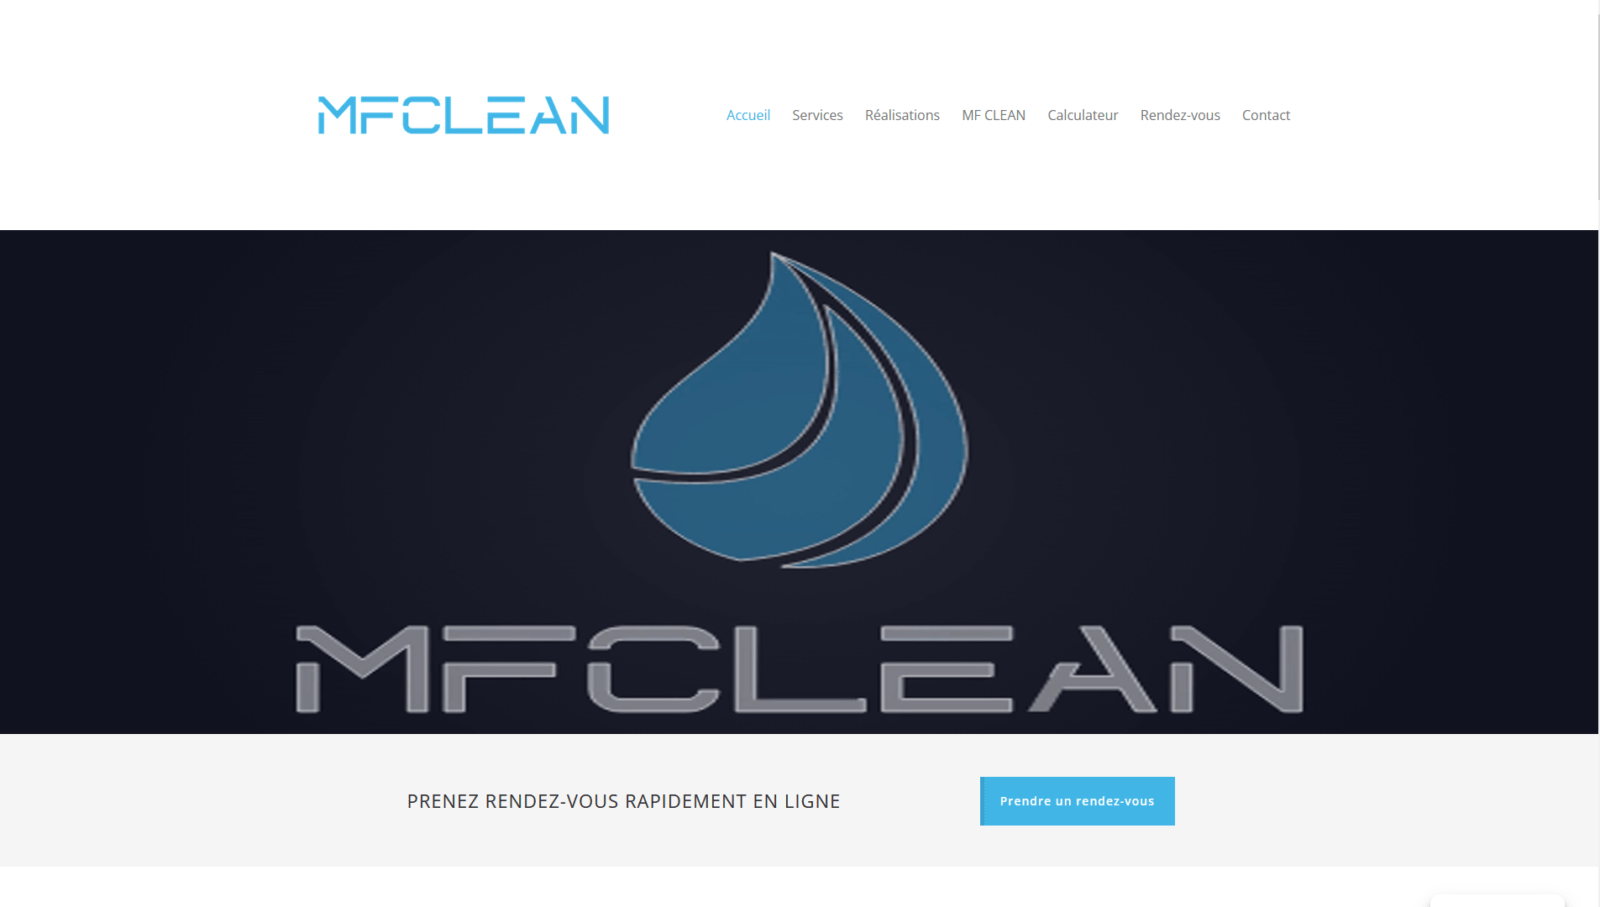 mfclean-site